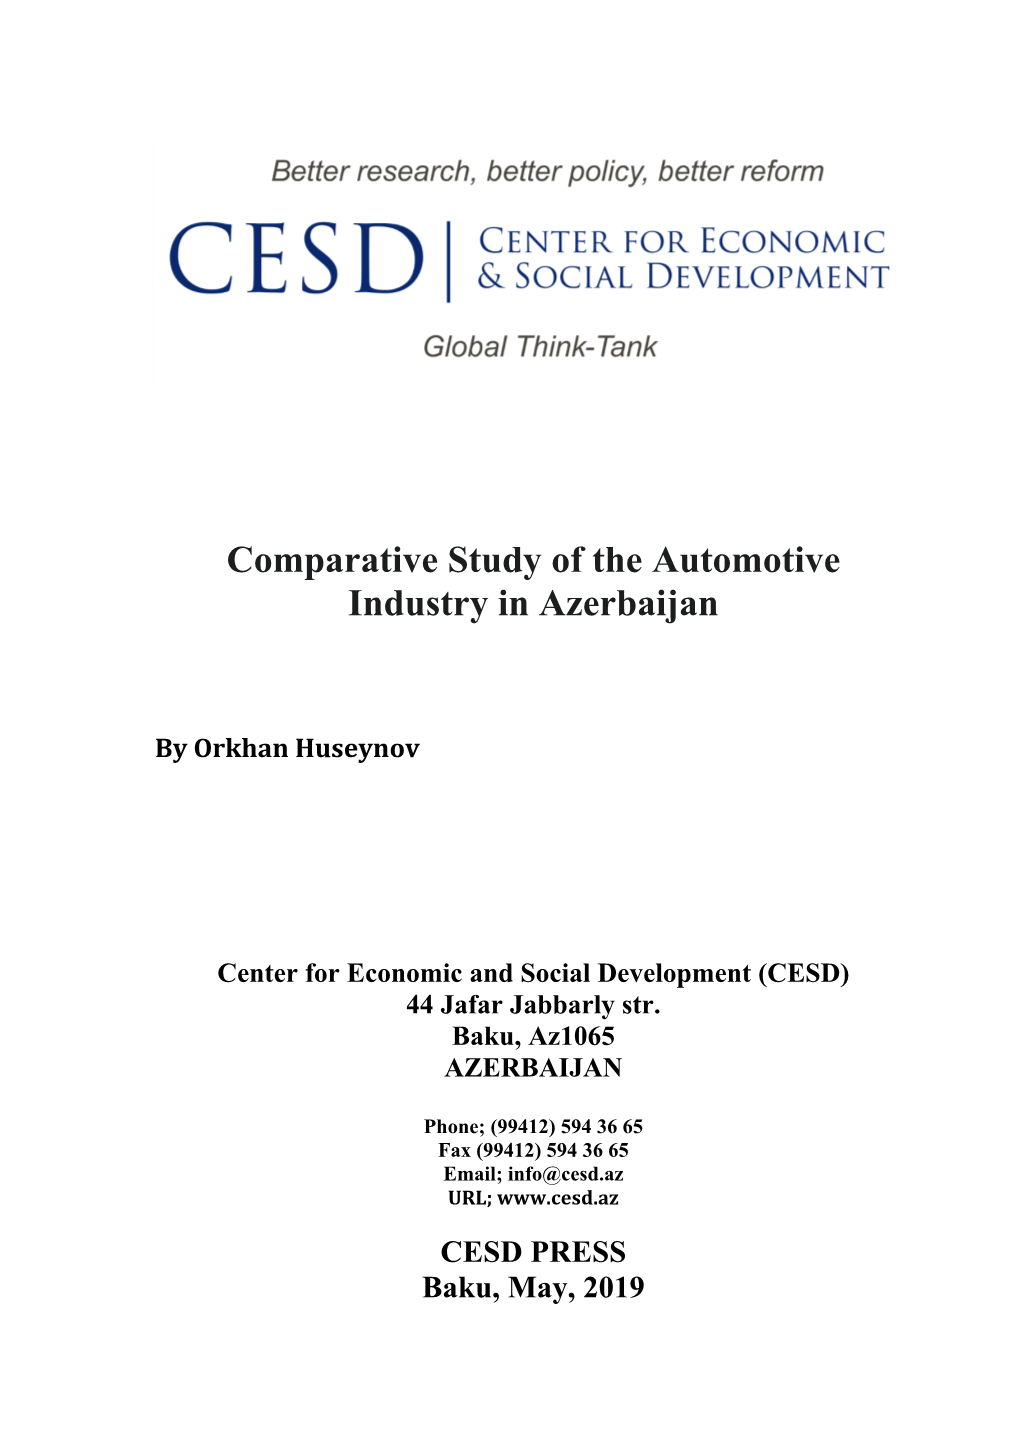 Comparative Study of the Automotive Industry in Azerbaijan